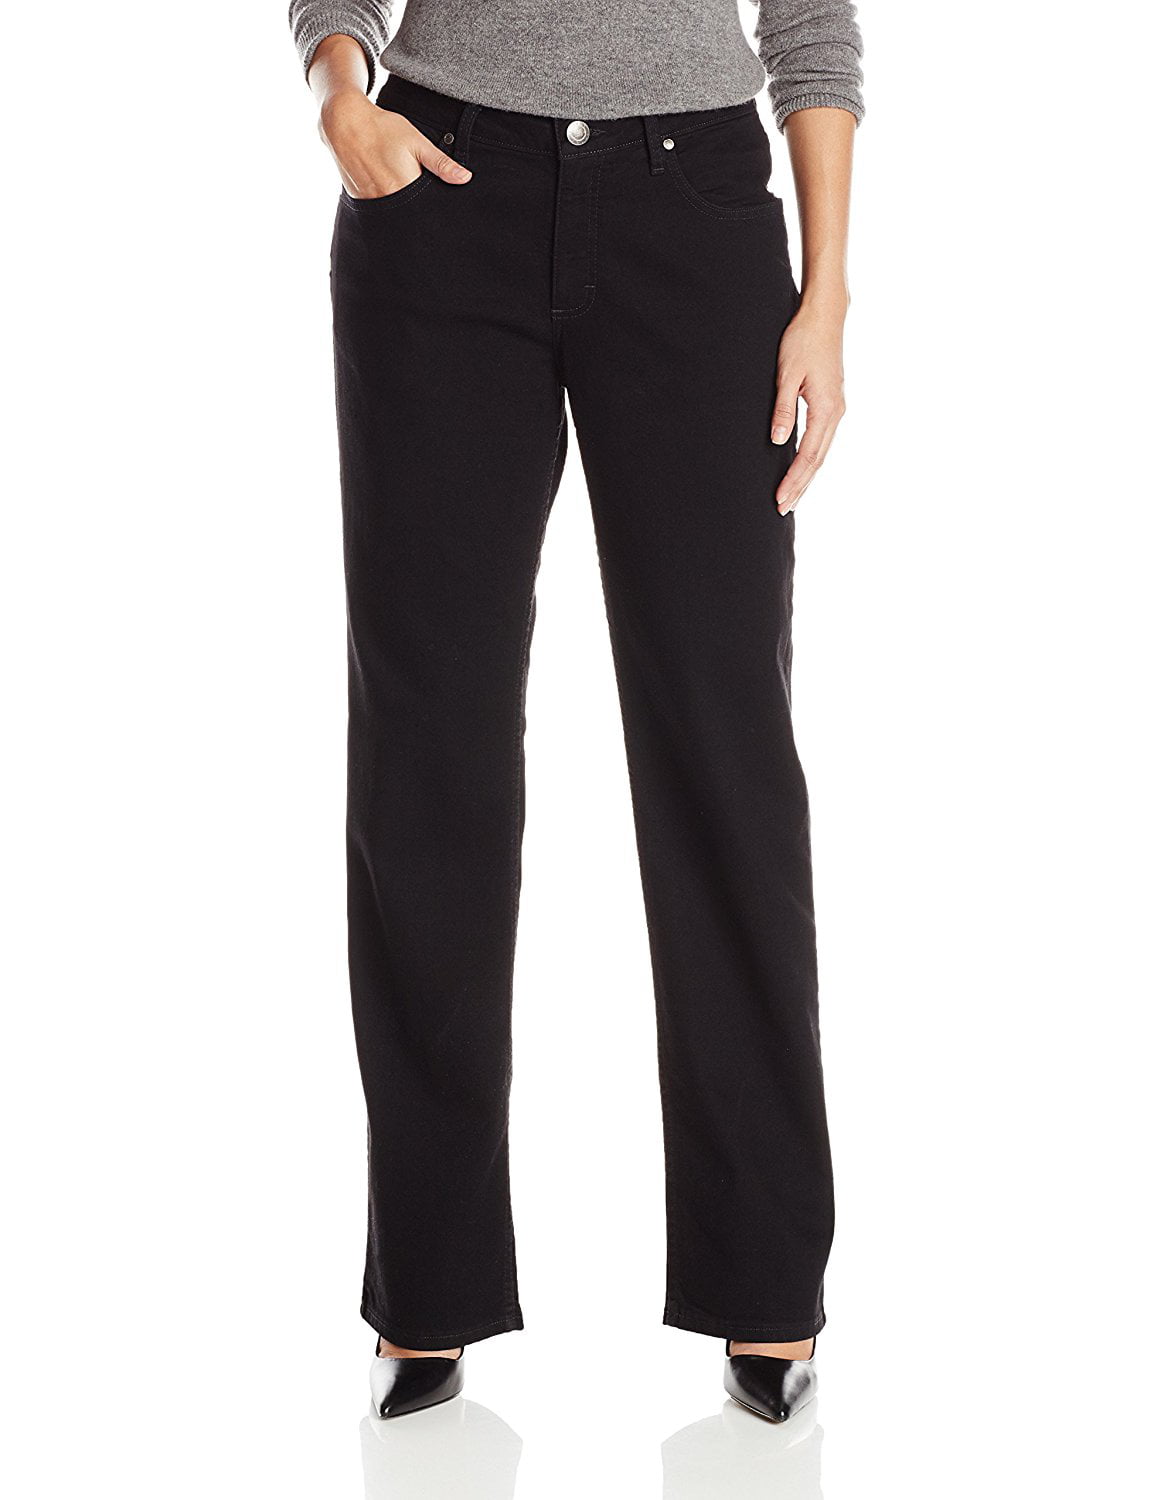 Lee Riders - Riders by Lee Womens 10X30 Relaxed Fit Straight Stretch ...